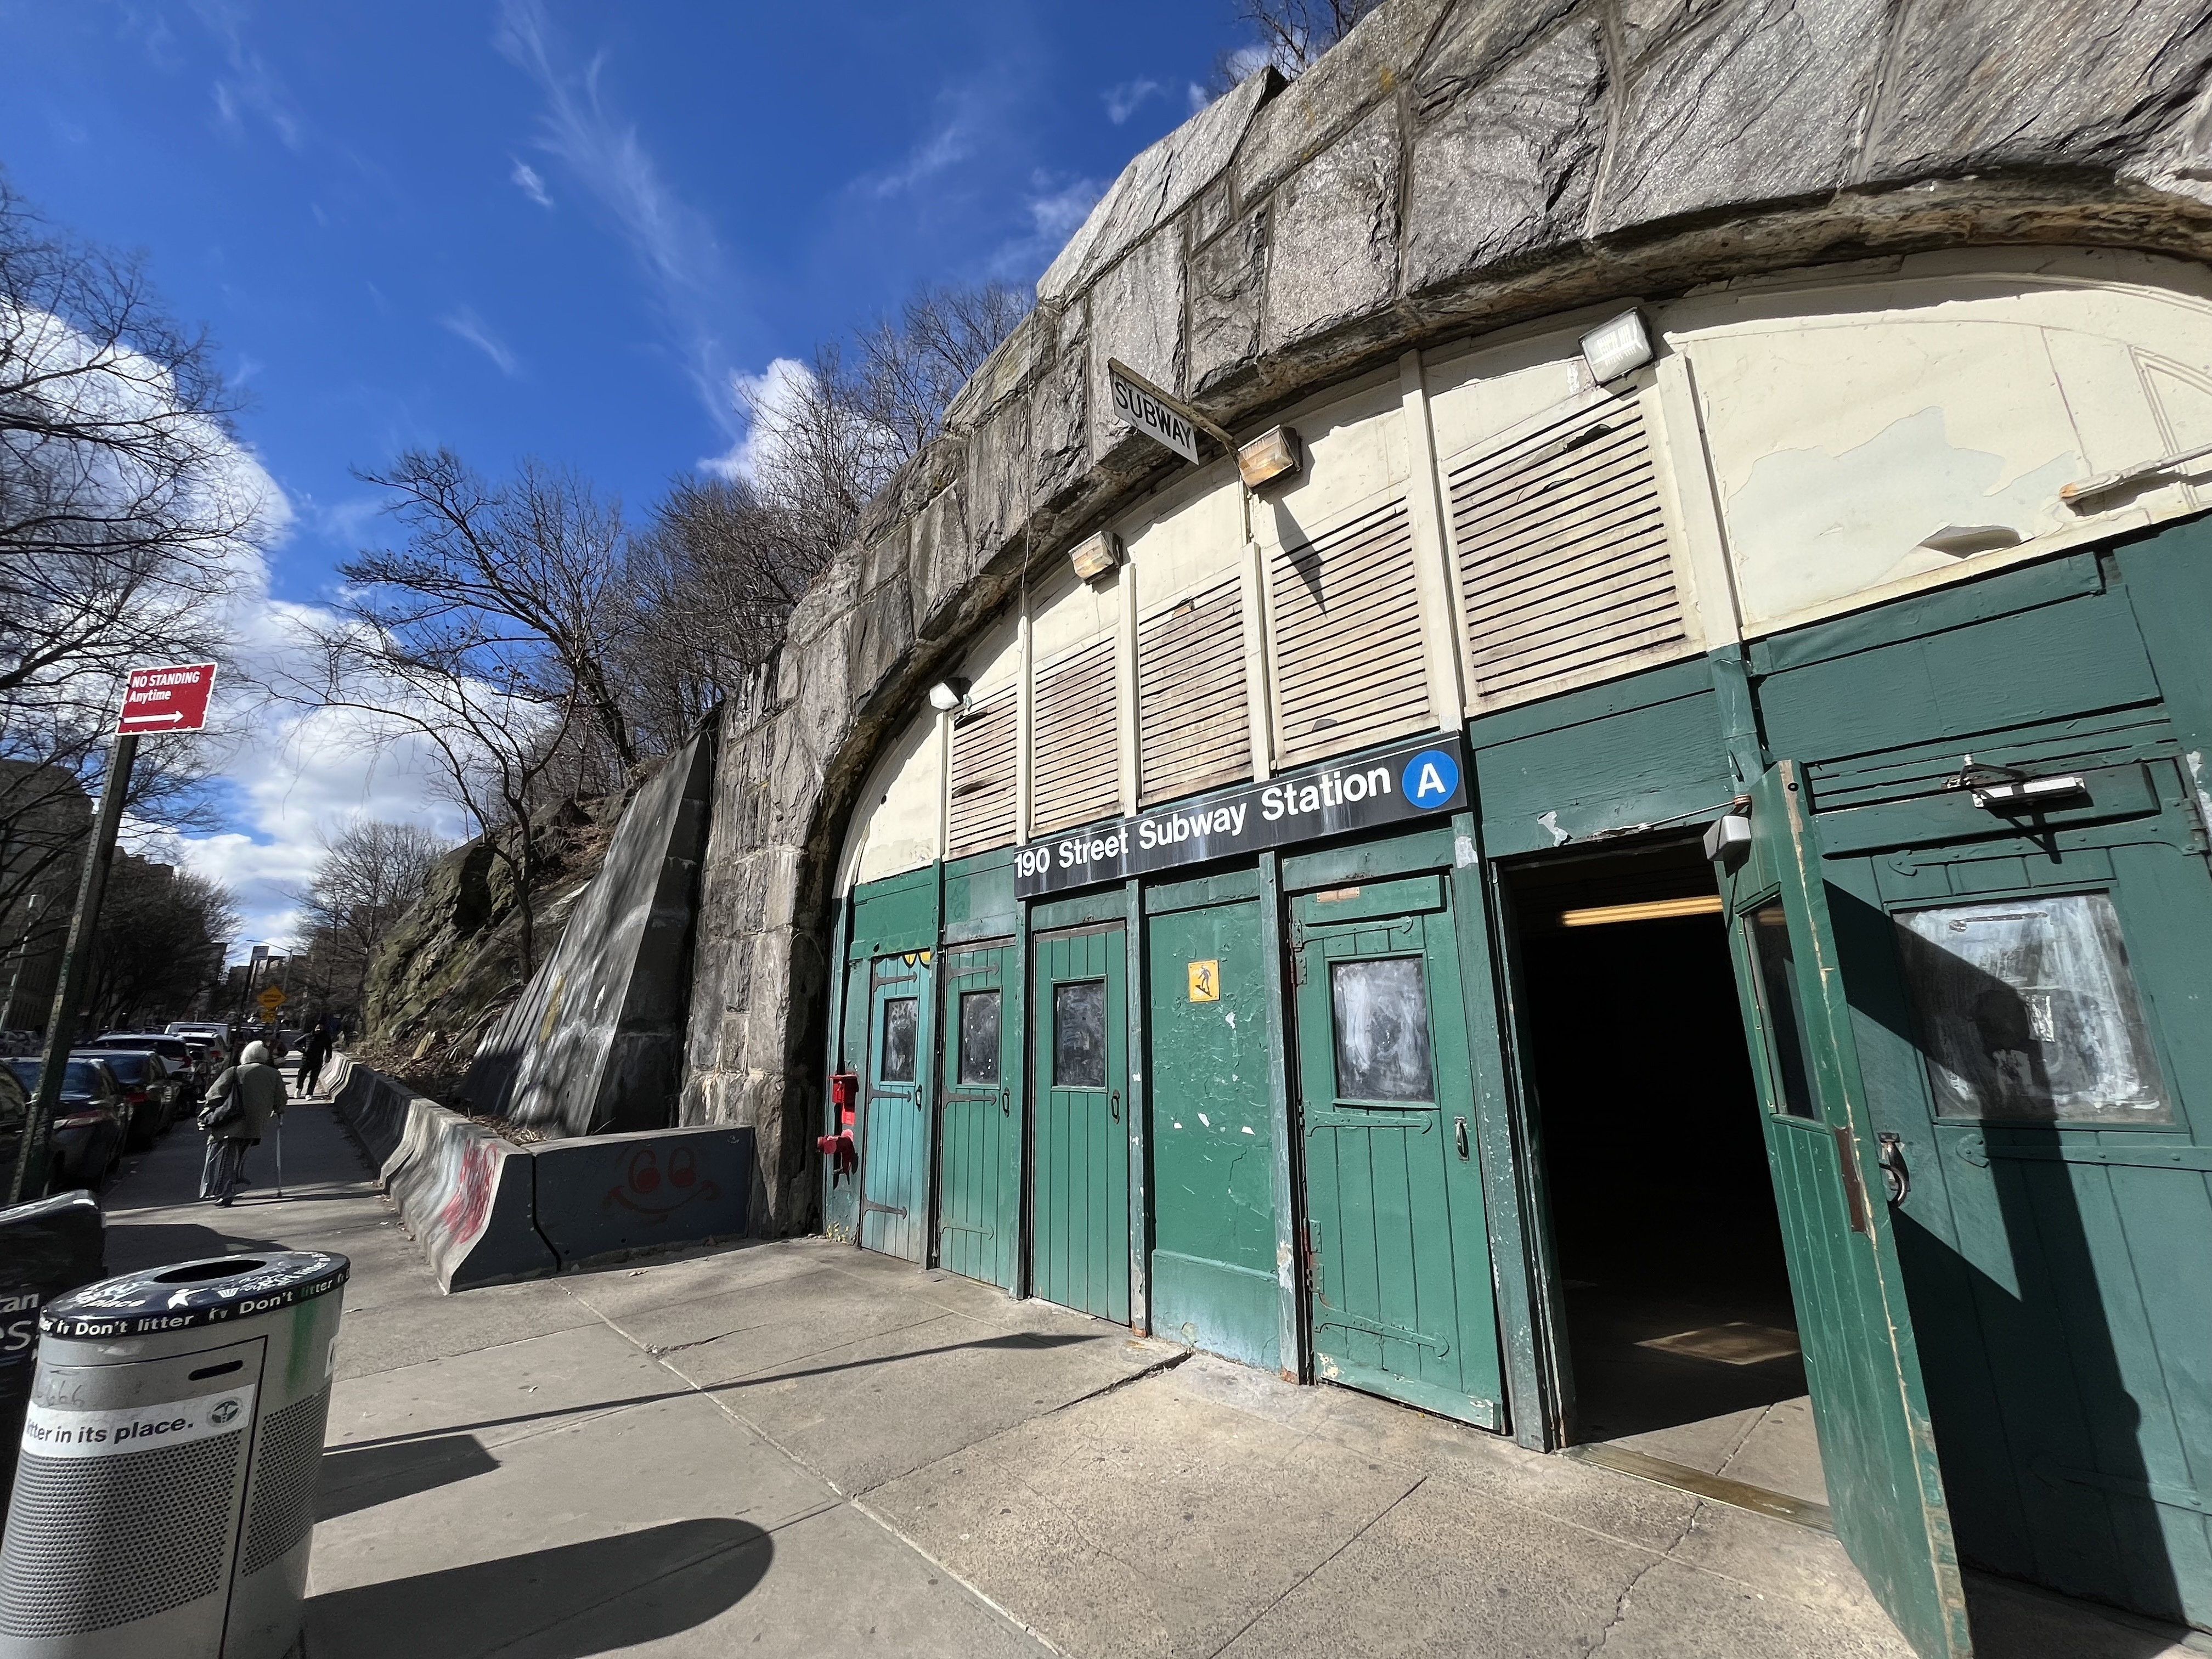 The 190th Street subway station in Washington Heights is buried deep beneath the bedrock.